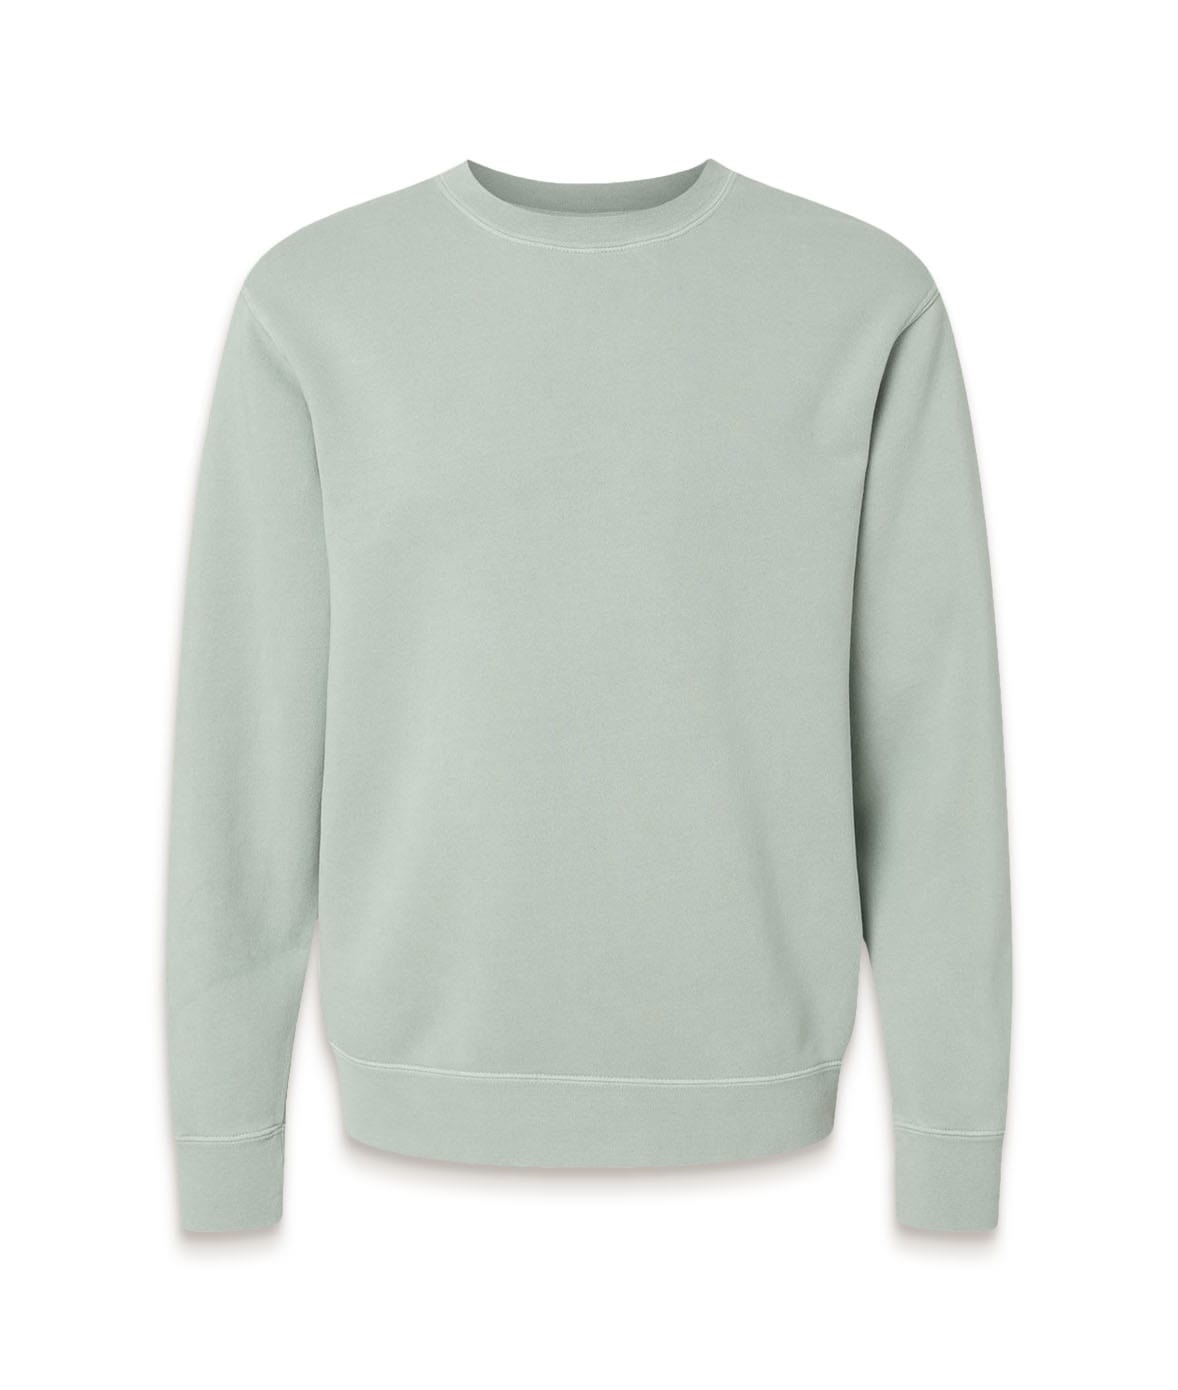 Women's Ridiculously Soft Oversized Pigment-Dyed Sweatshirt